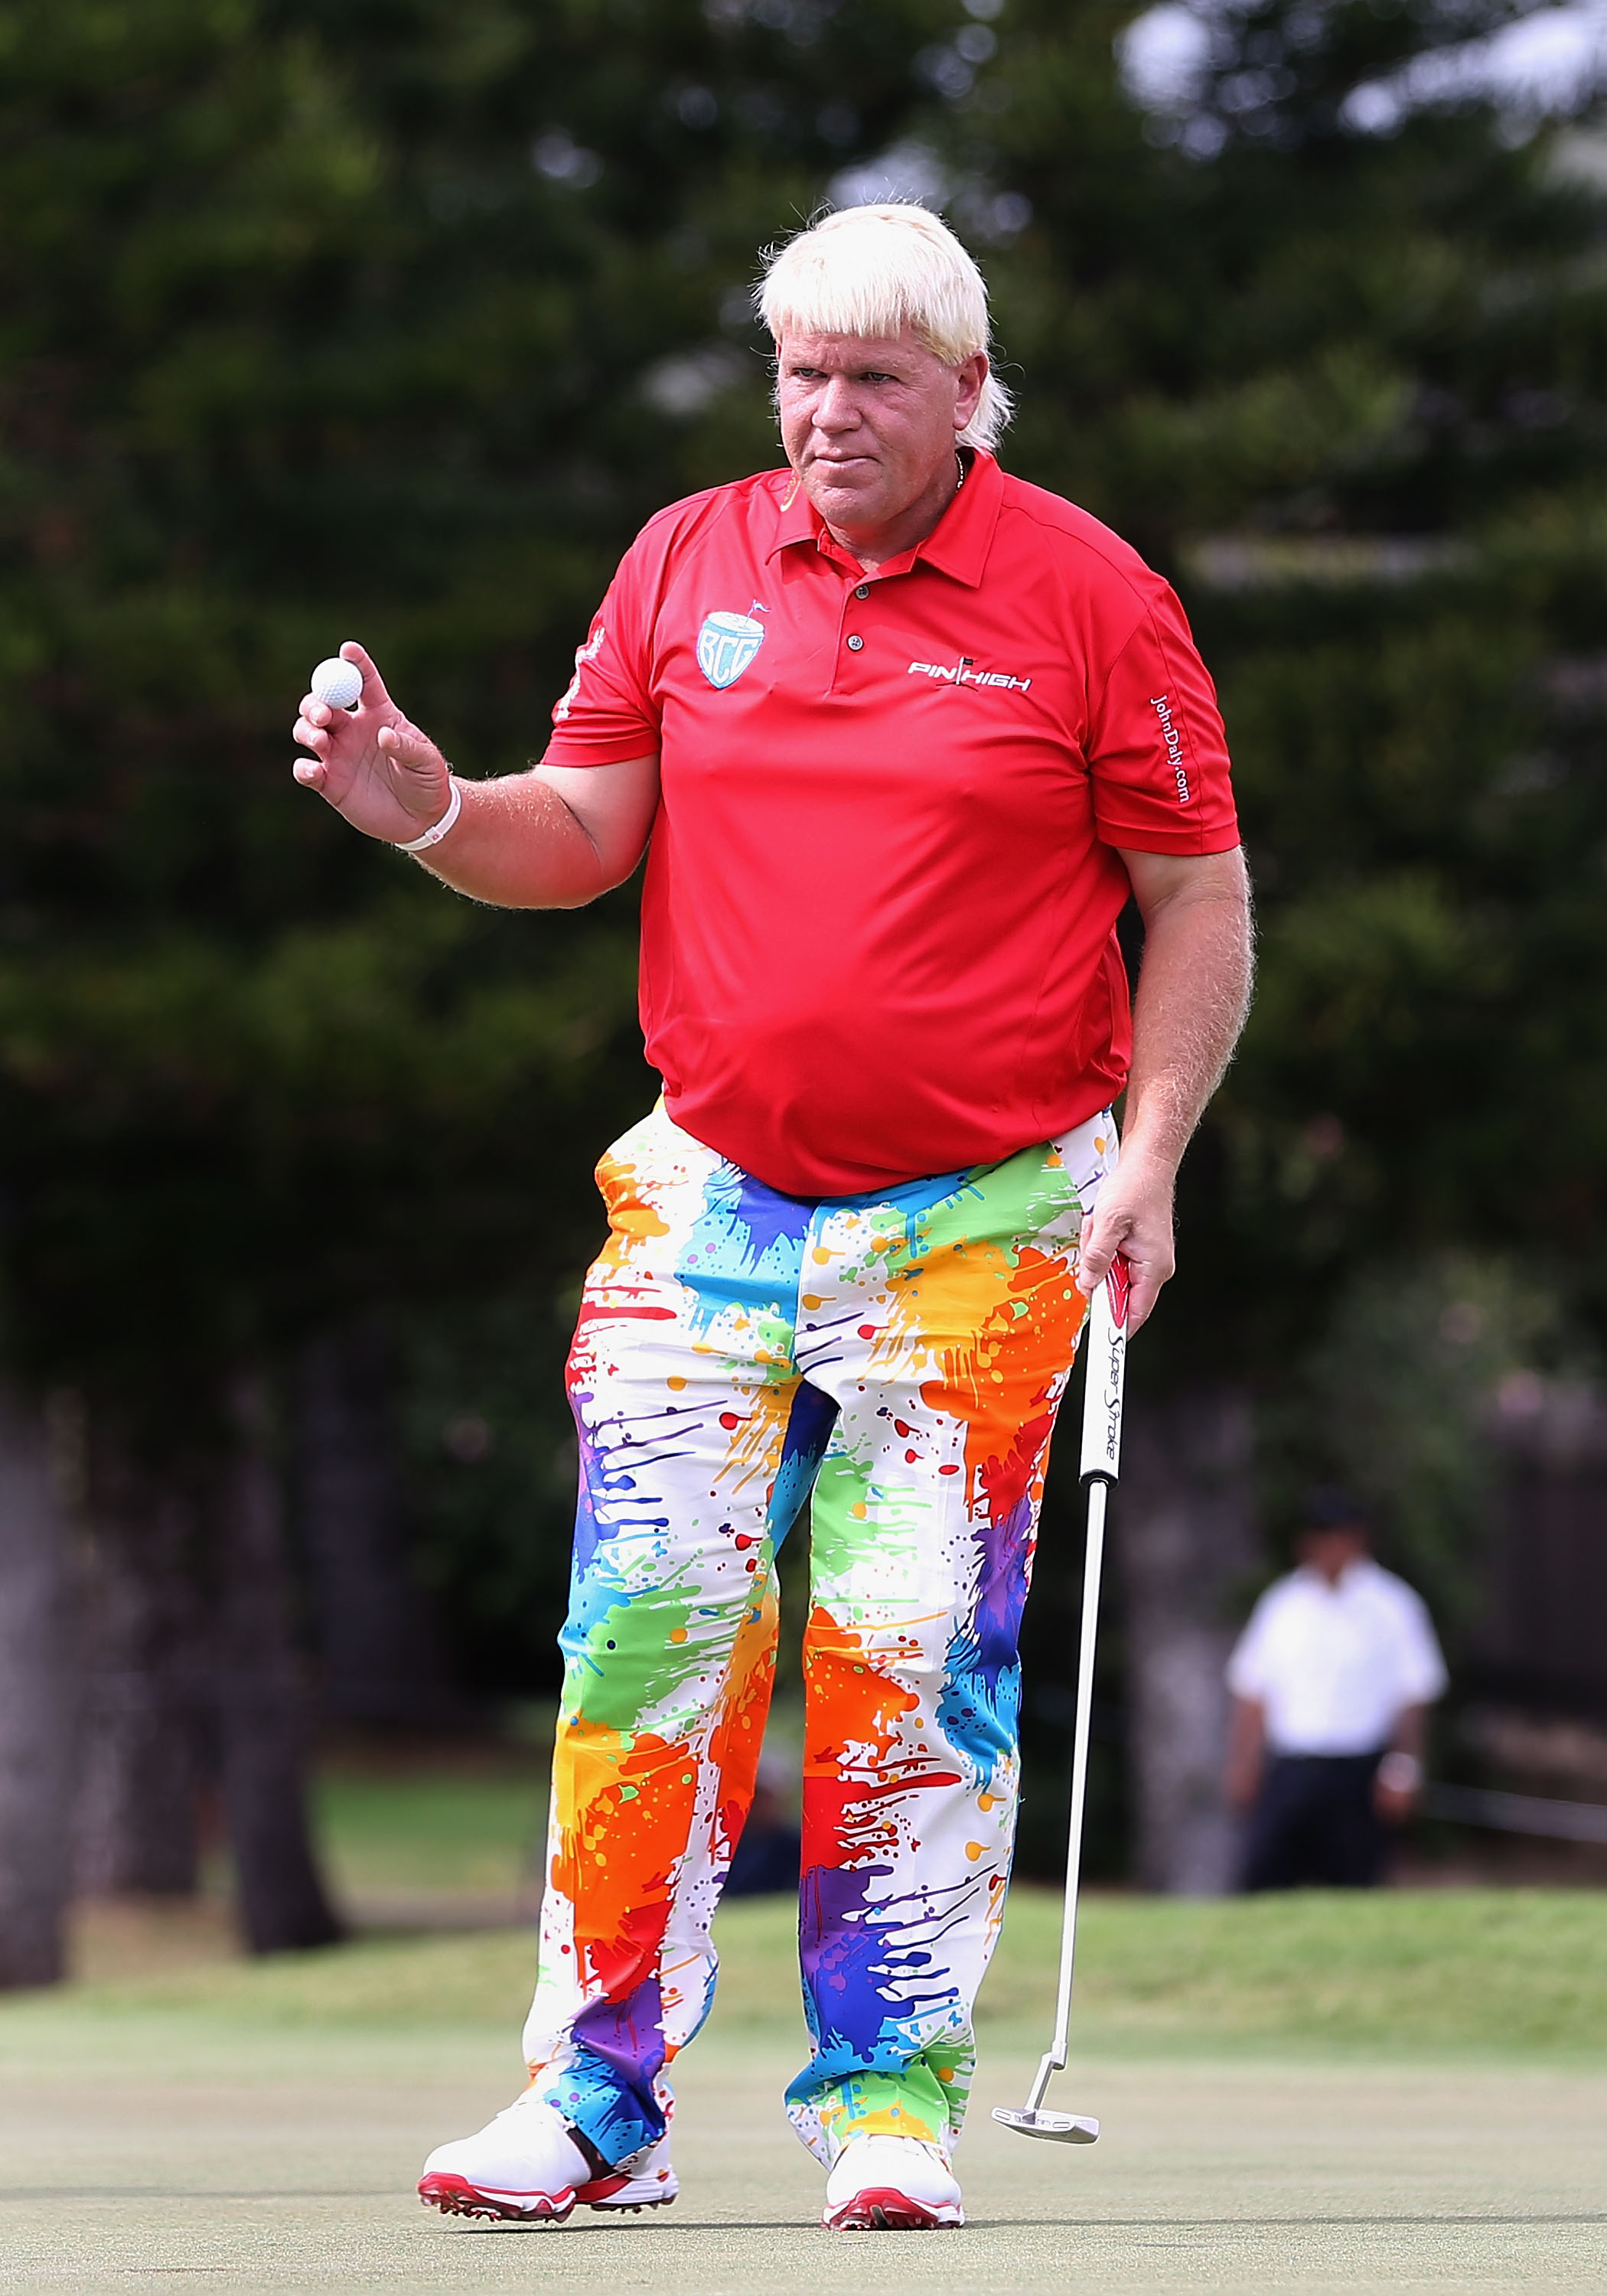 403 Words On Why John Daly's Pants Almost Make Golf Watchable